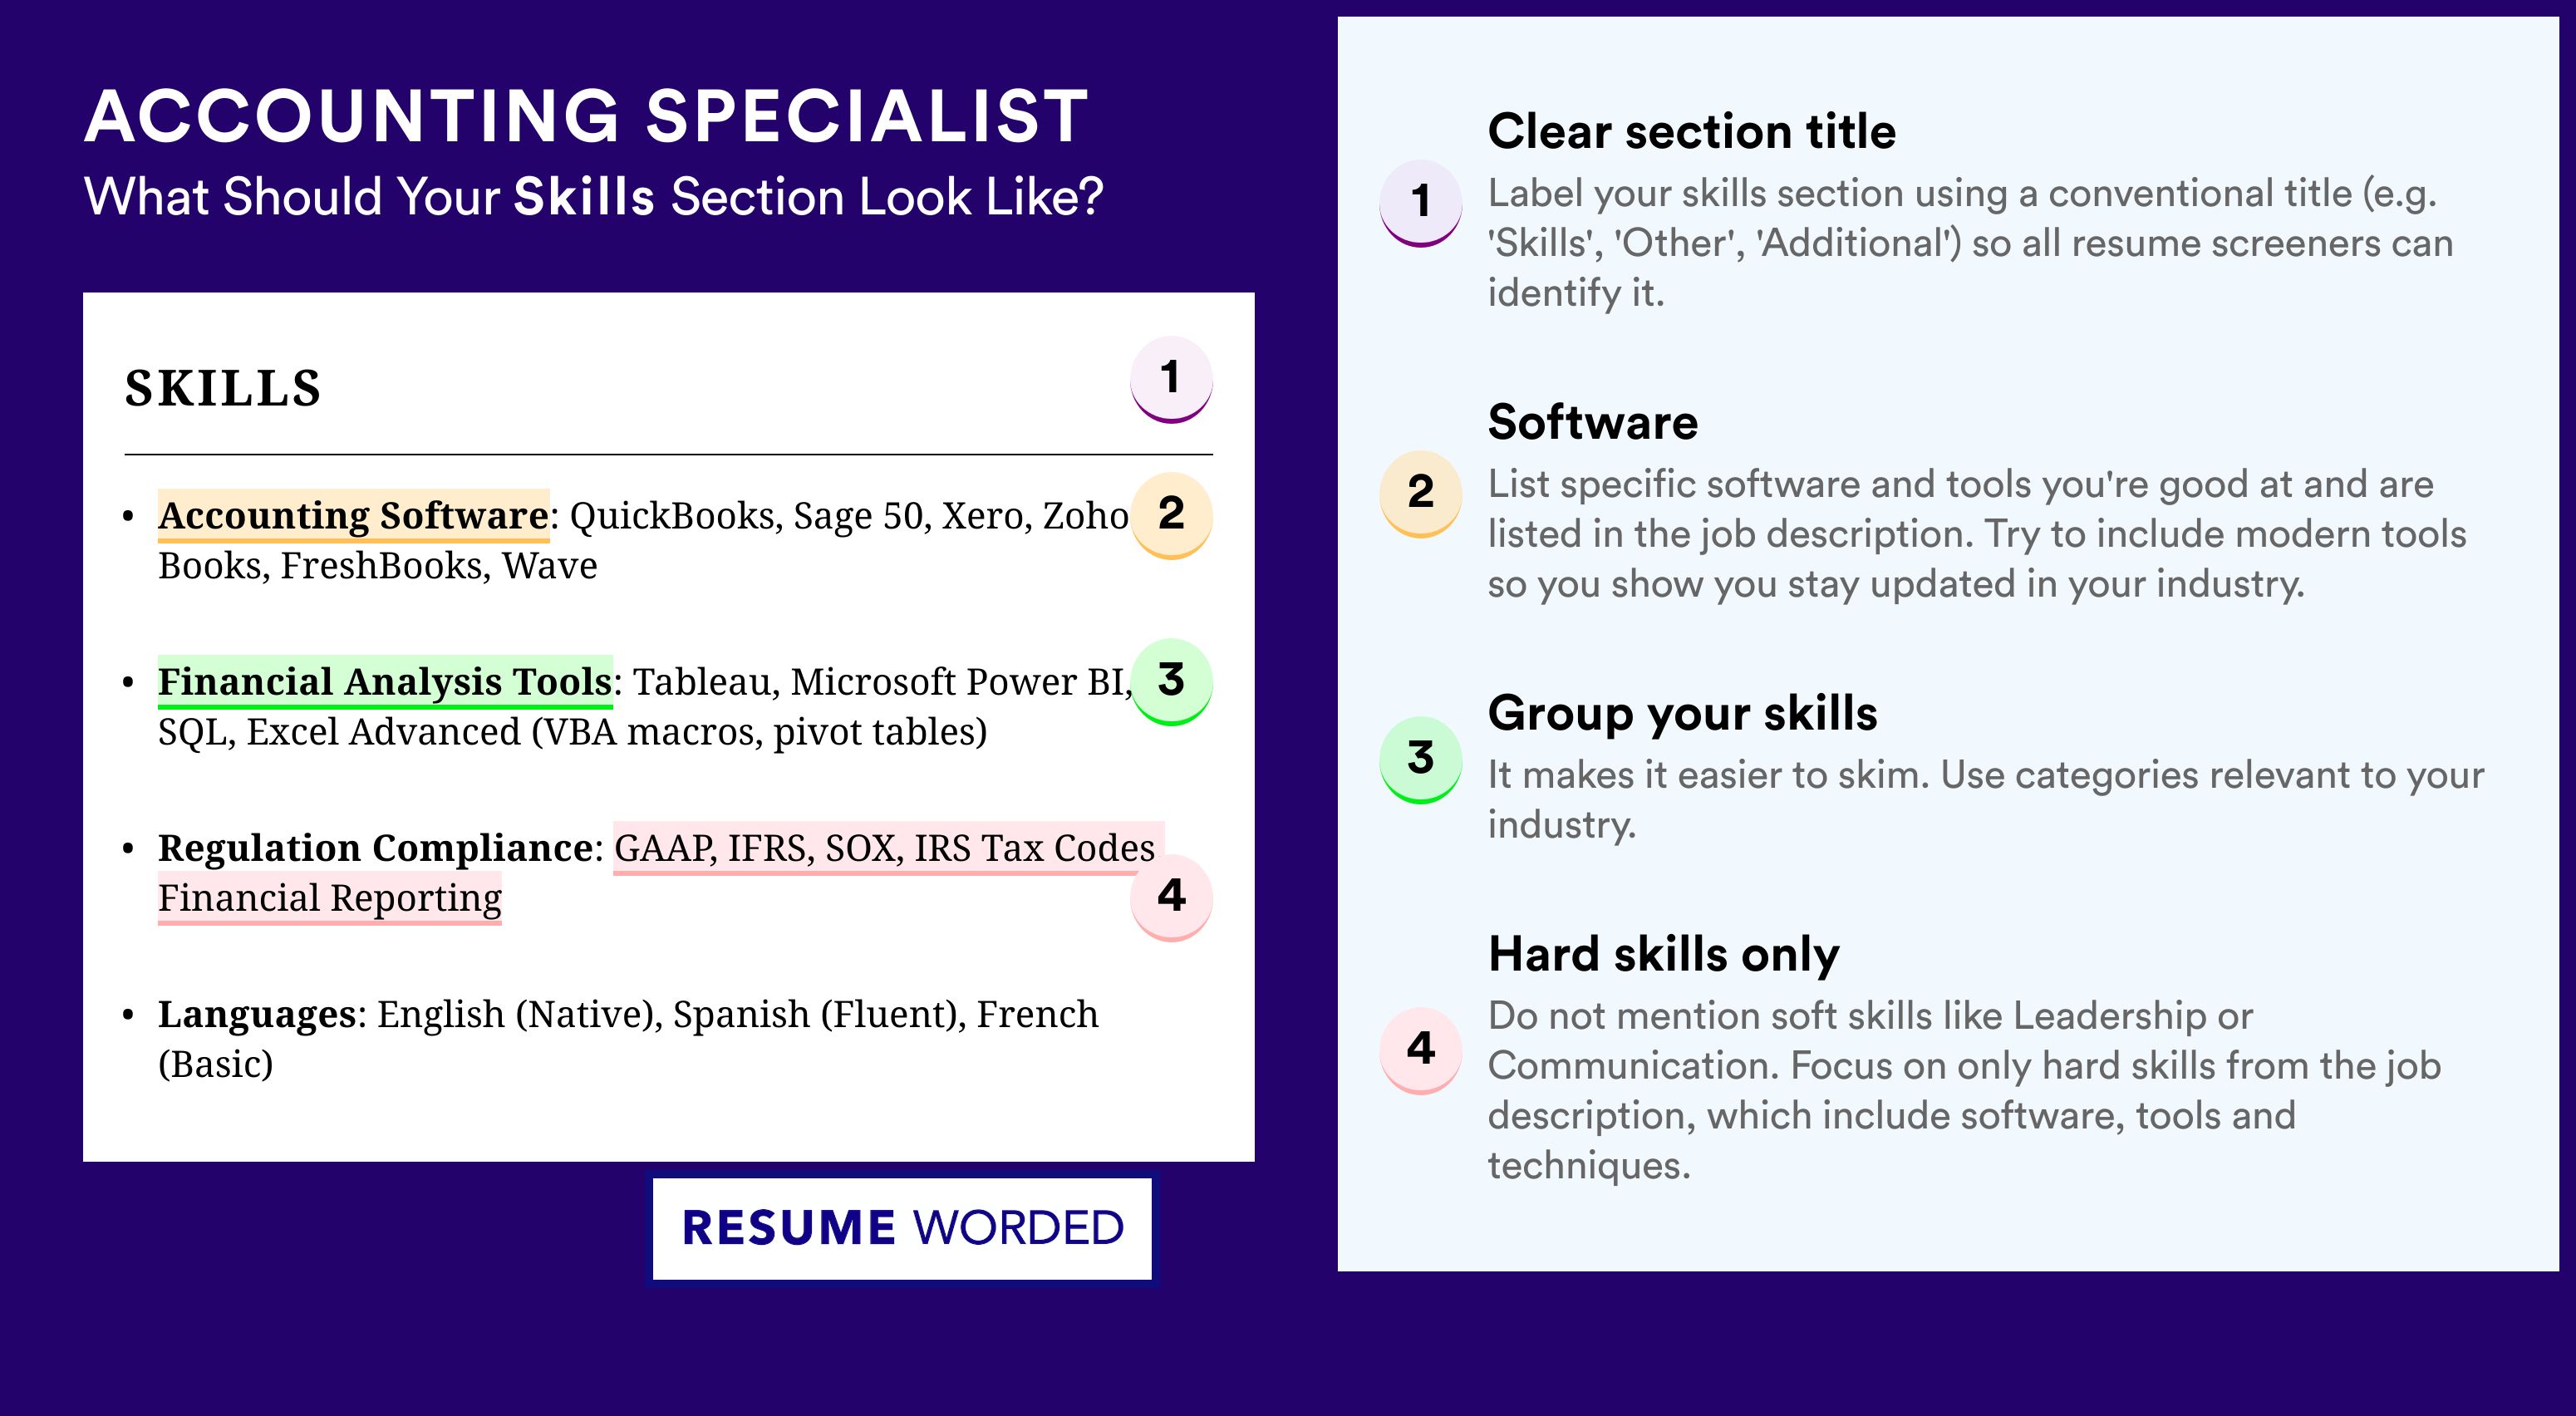 How To Write Your Skills Section - Accounting Specialist Roles